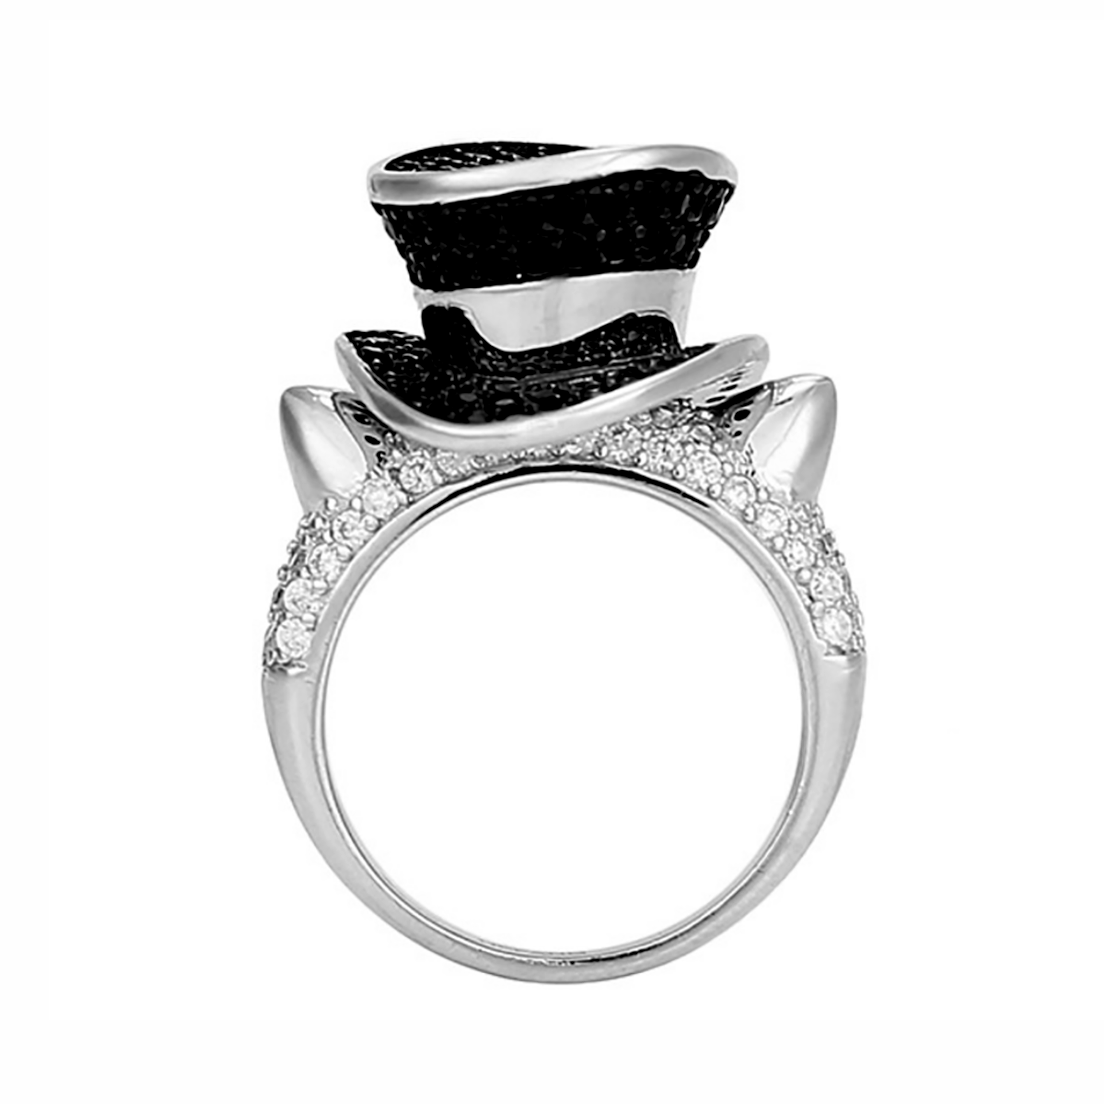 Tophat Cat Statement Ring Black Cz Plated Girls Ginger Lyne Collection - 9